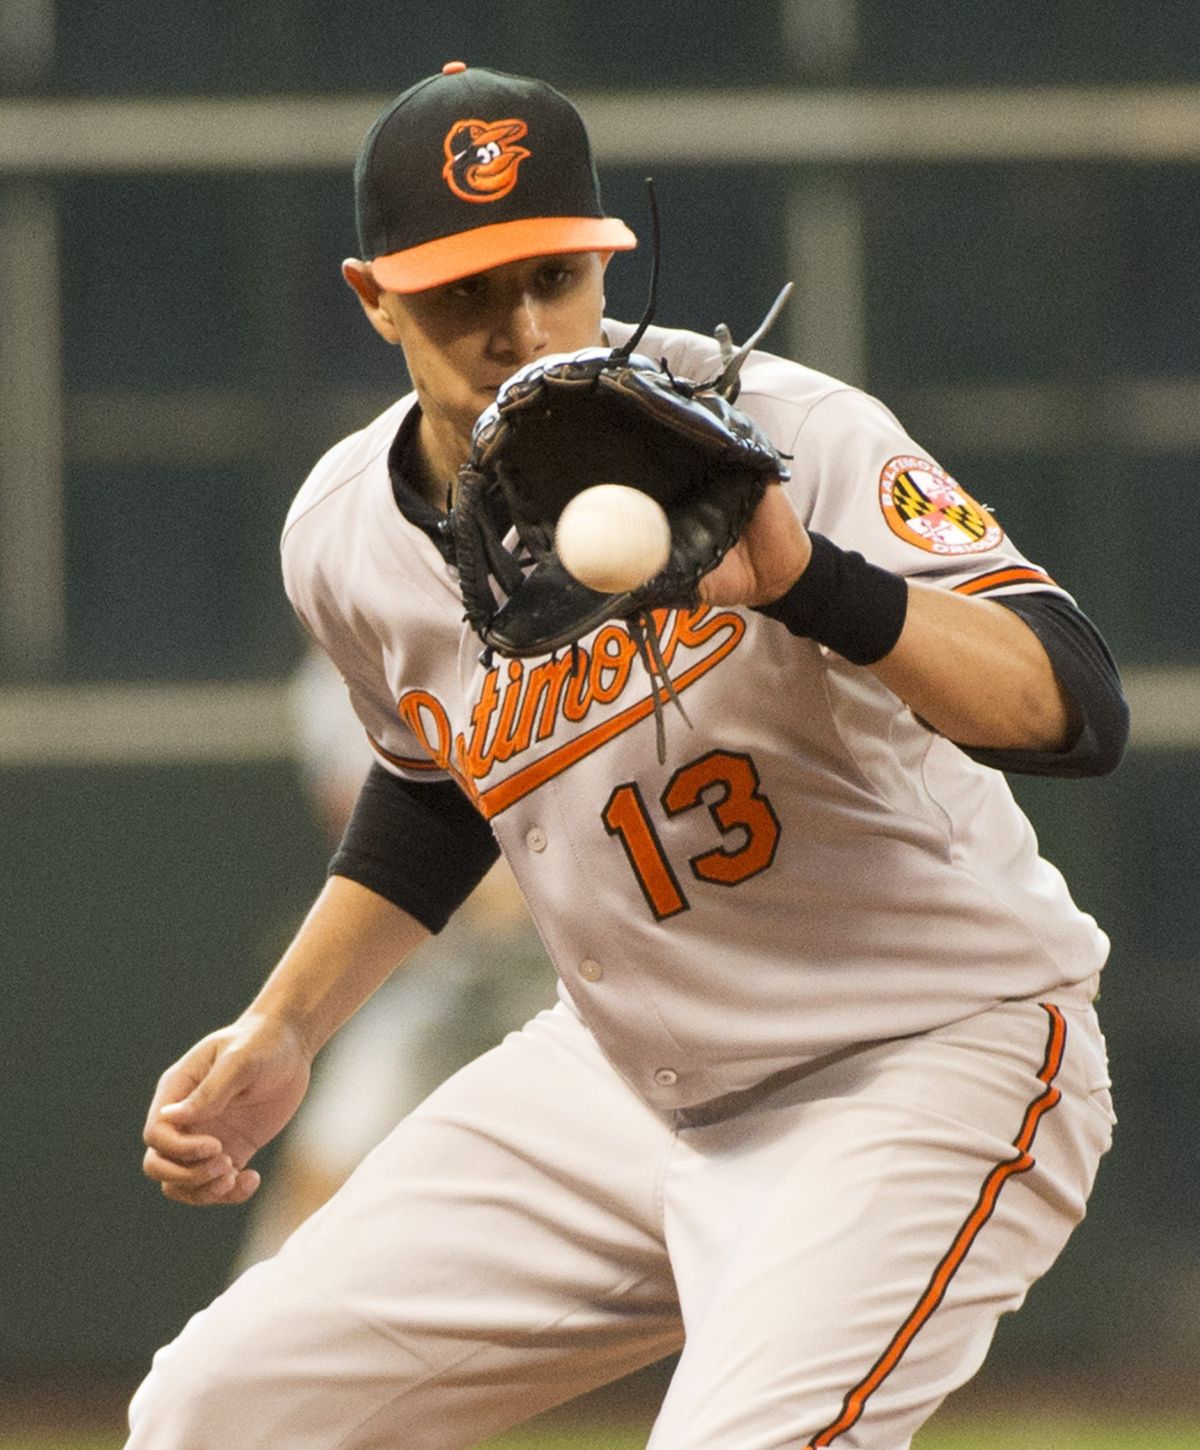 Third baseman Manny Machado has thrilled Baltimore Orioles fans with his defensive wizardry.